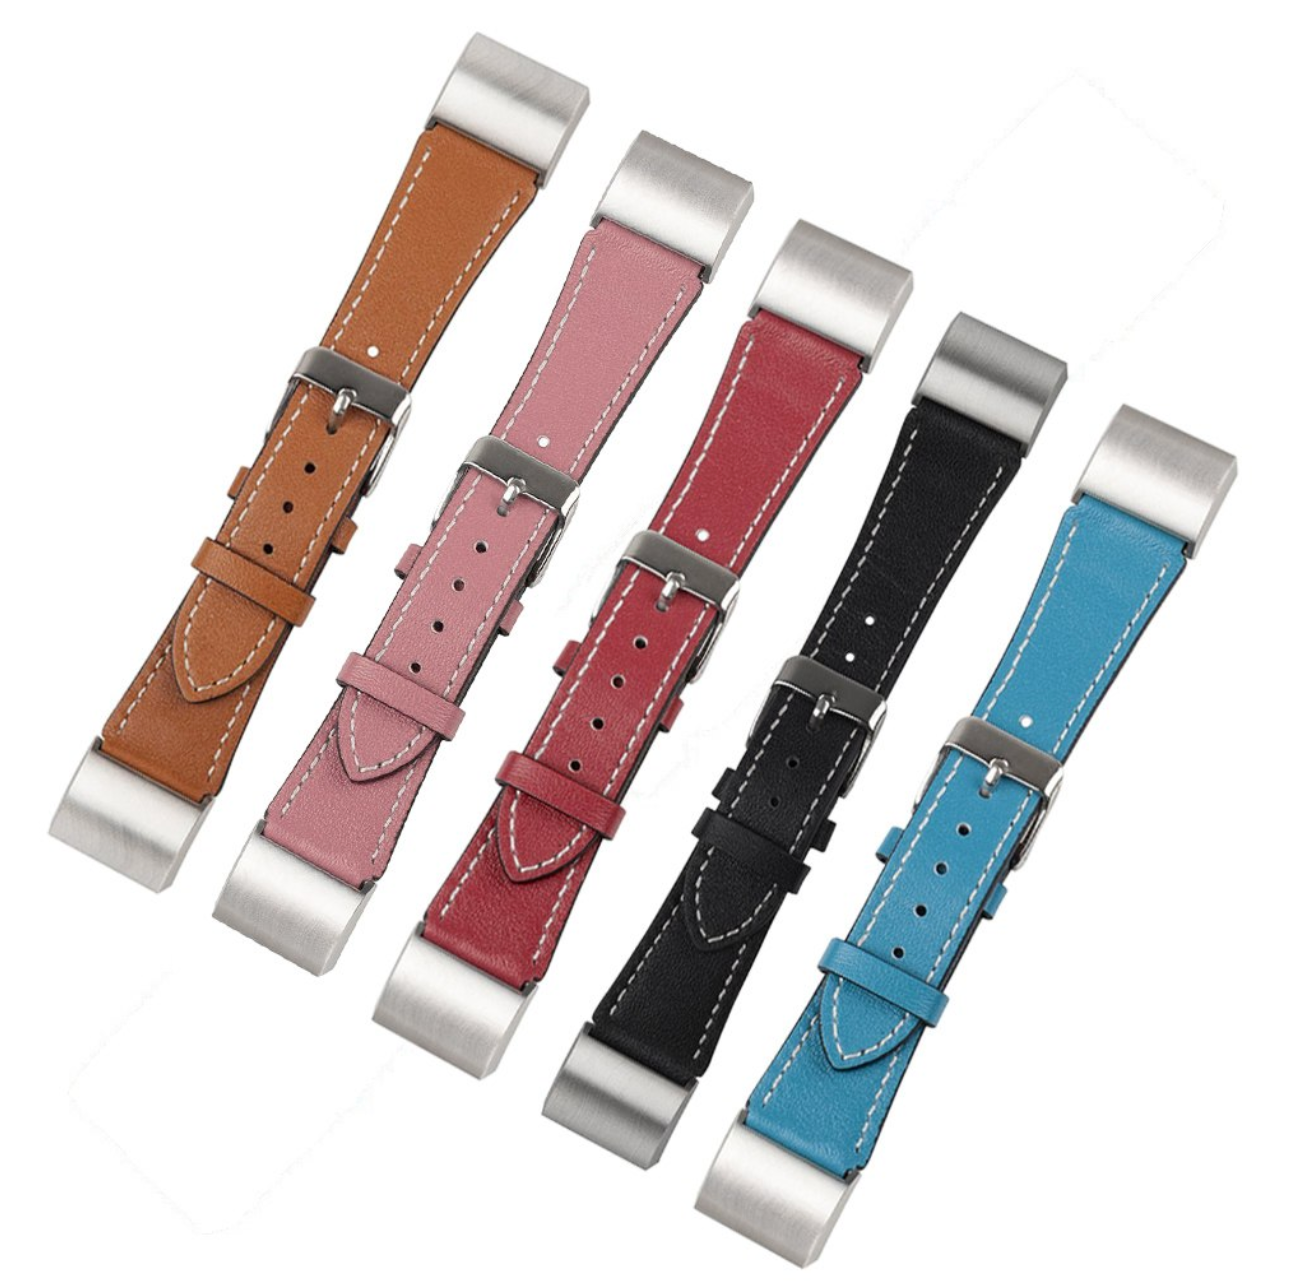 Calf Leather Fitbit Charge 2 Bands - OzStraps